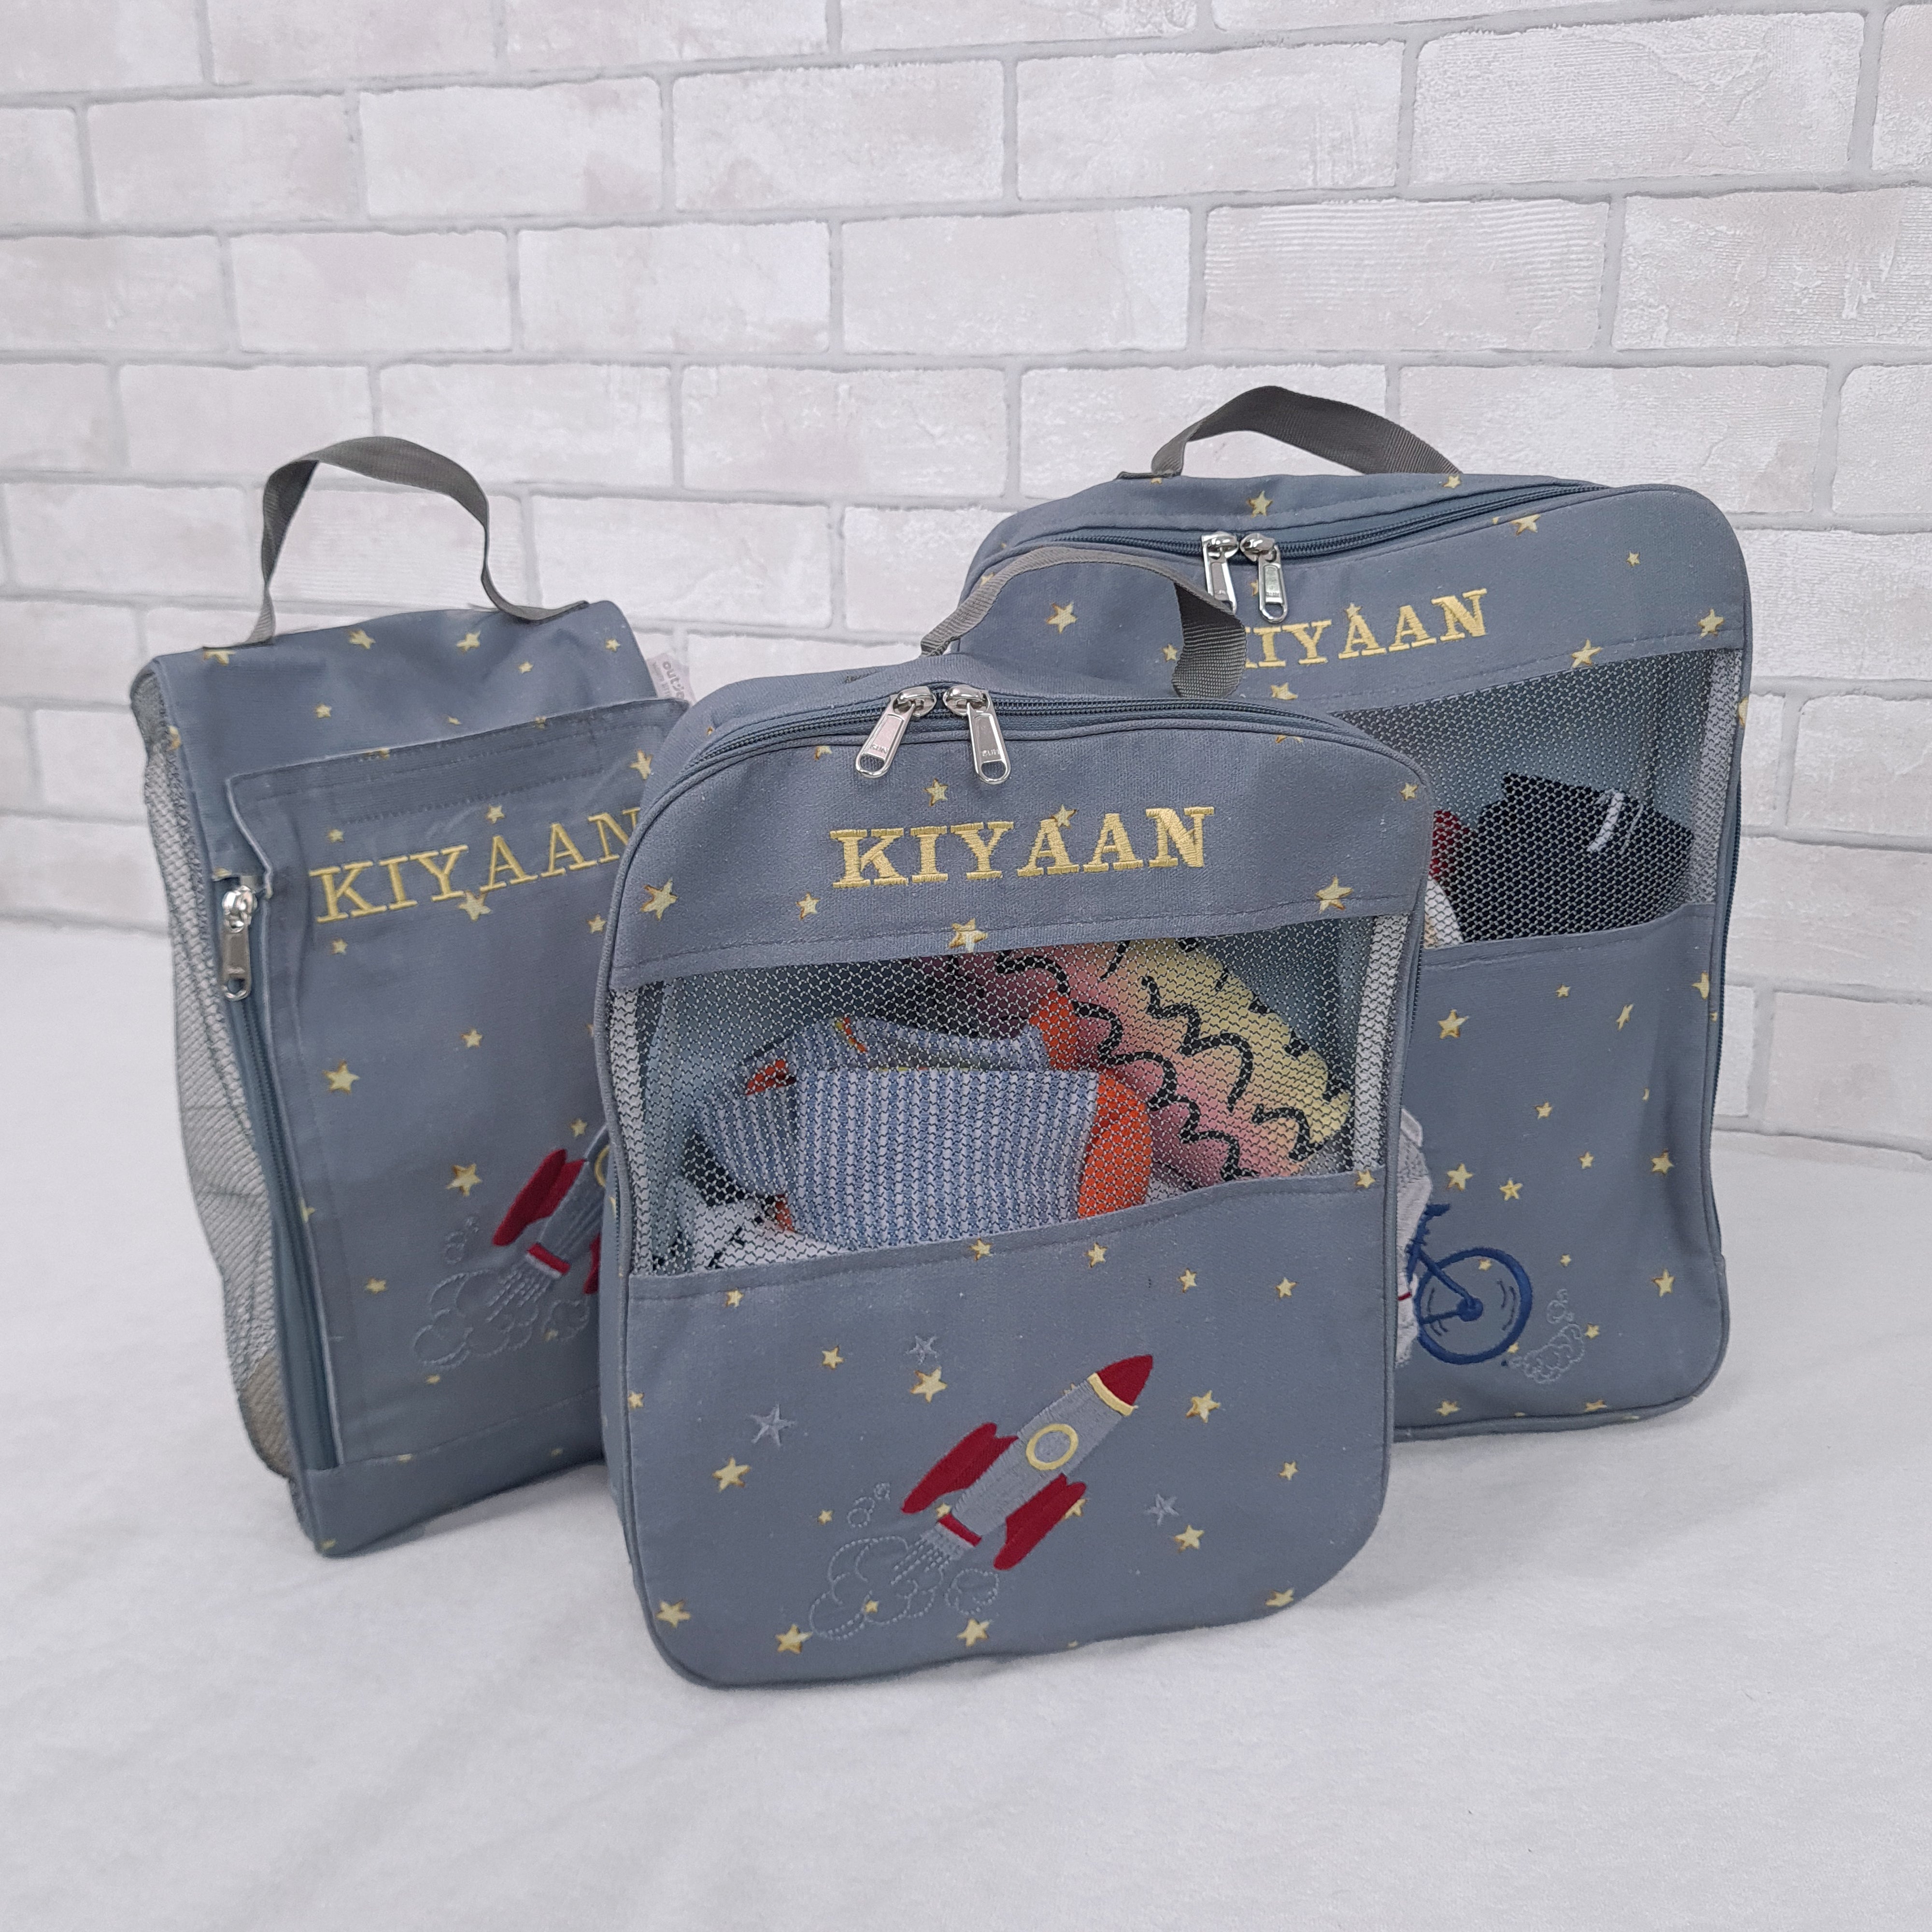 To The Moon And Back  Organizer Bags  (Set of 3) Small Organizer Bag  +  Big Organizer Bag  +  Shoe Bag